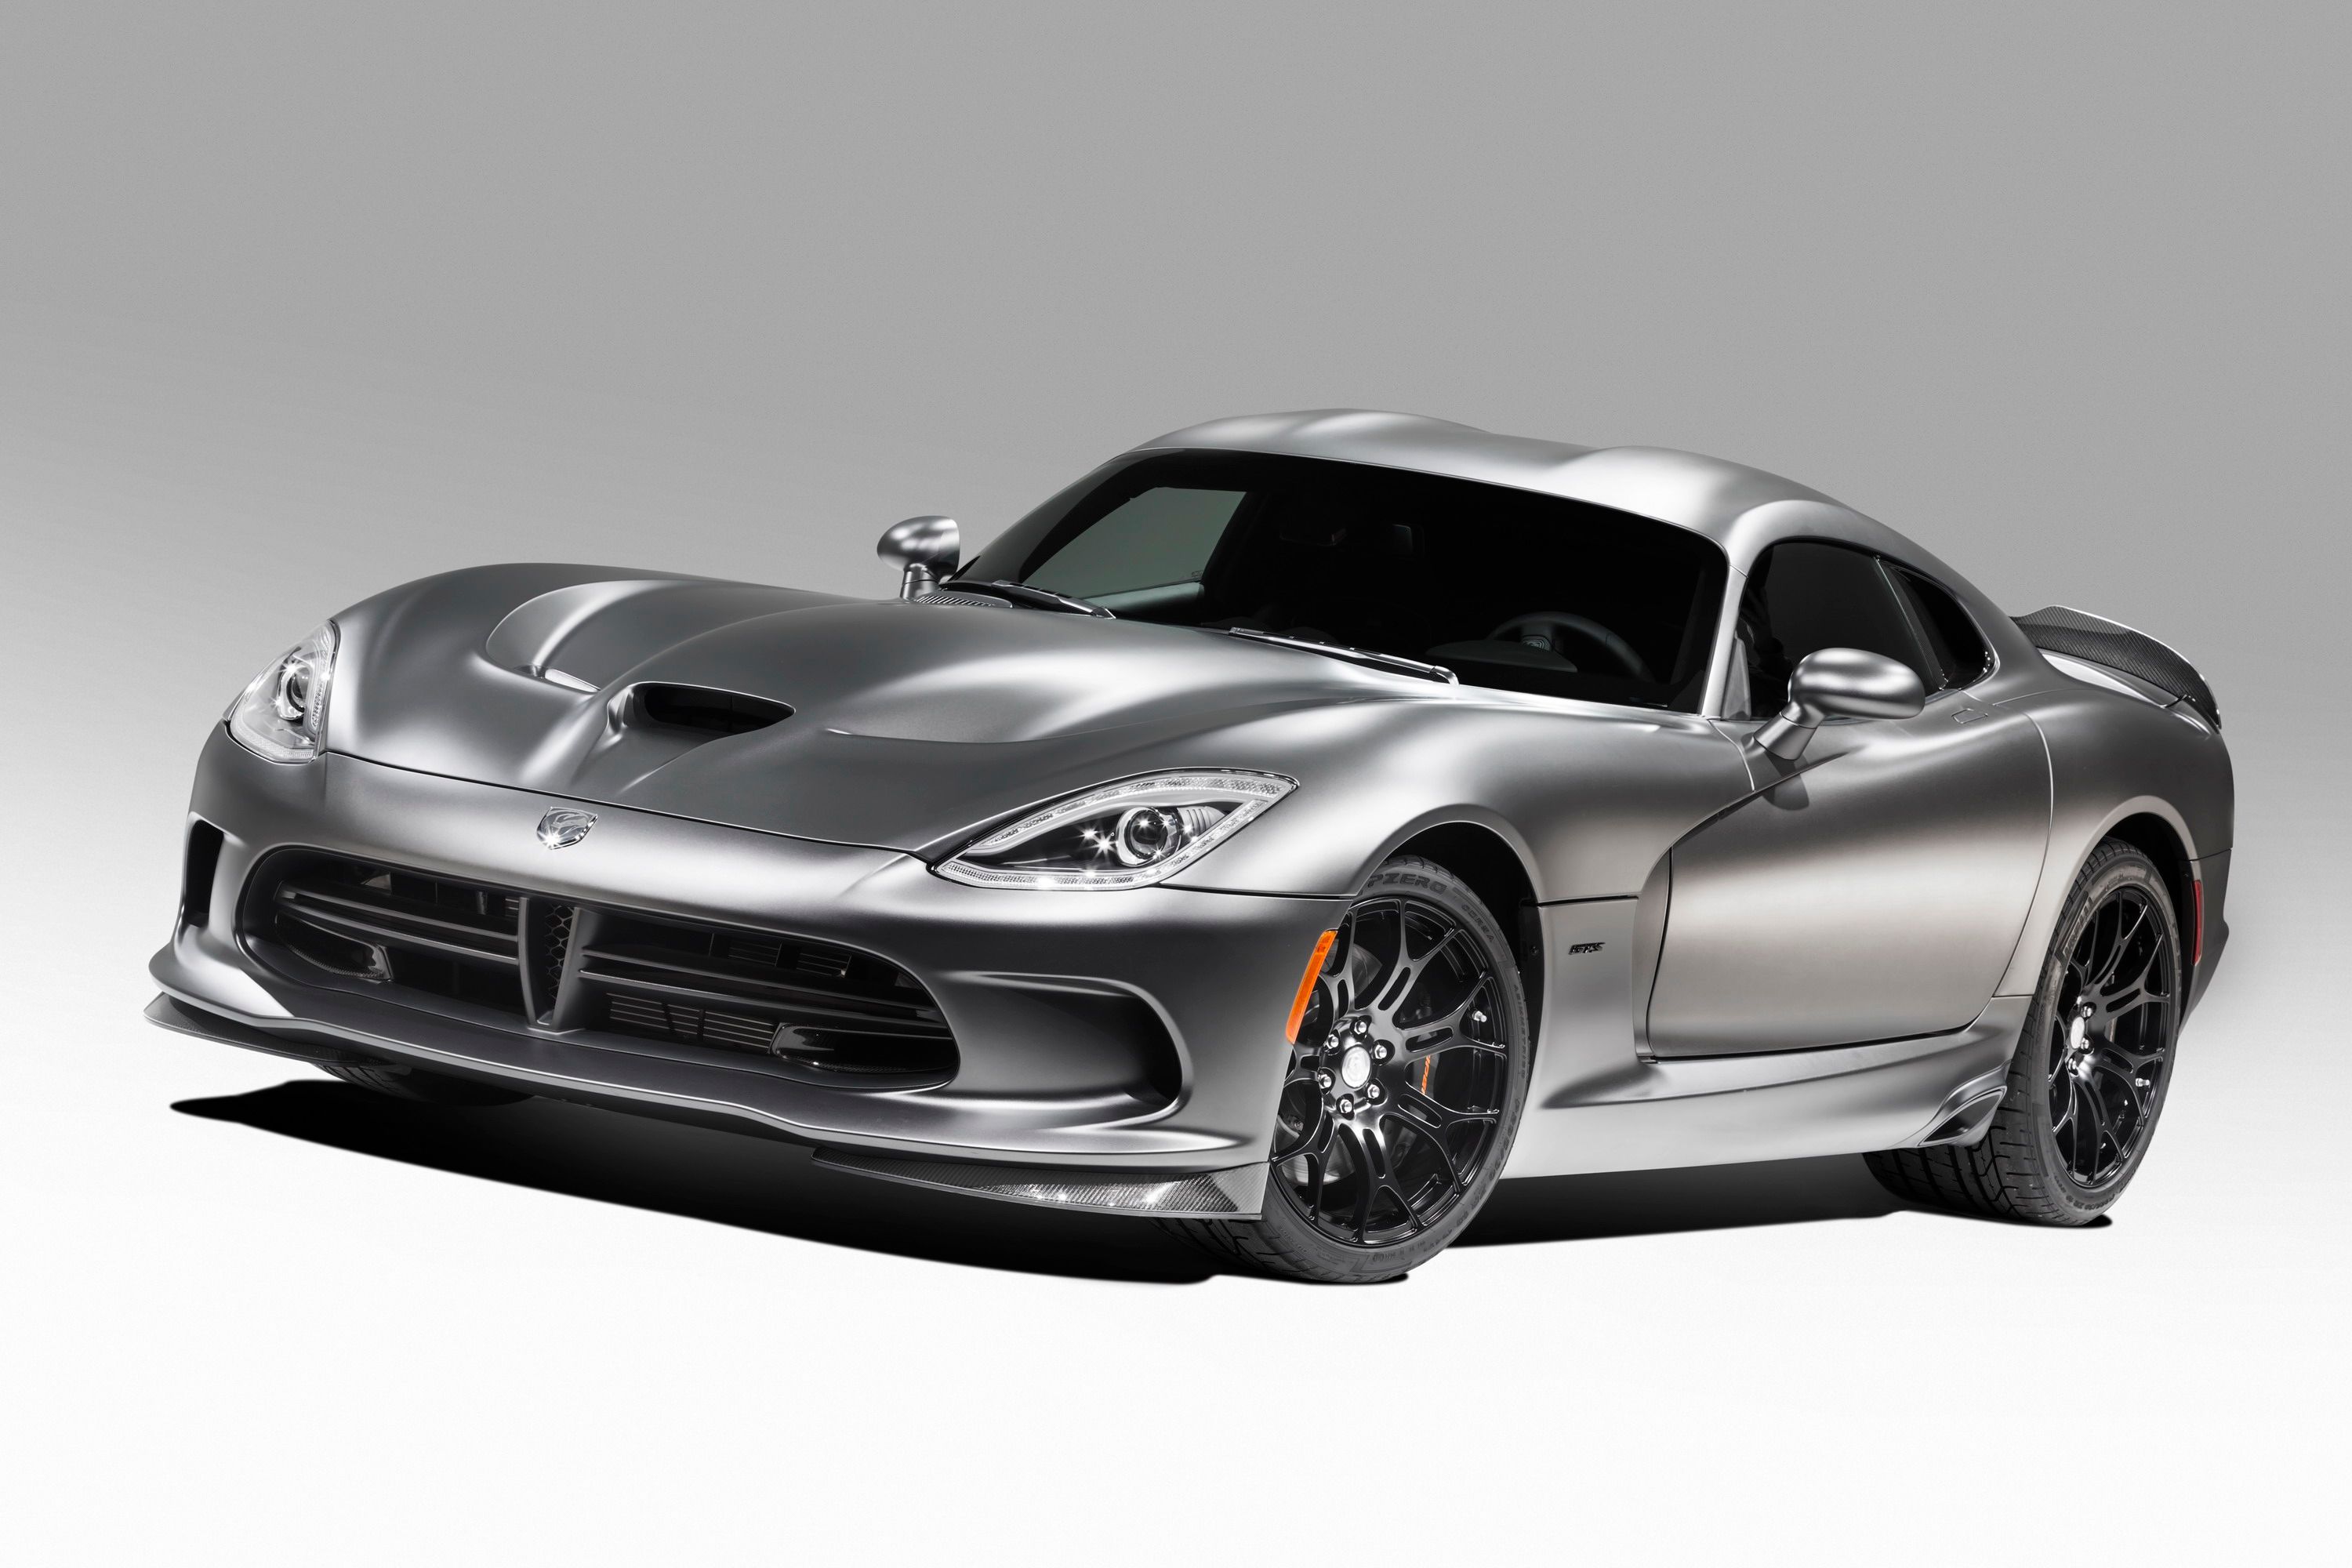 2014 SRT Viper Anodized Carbon Special Edition Time Attack